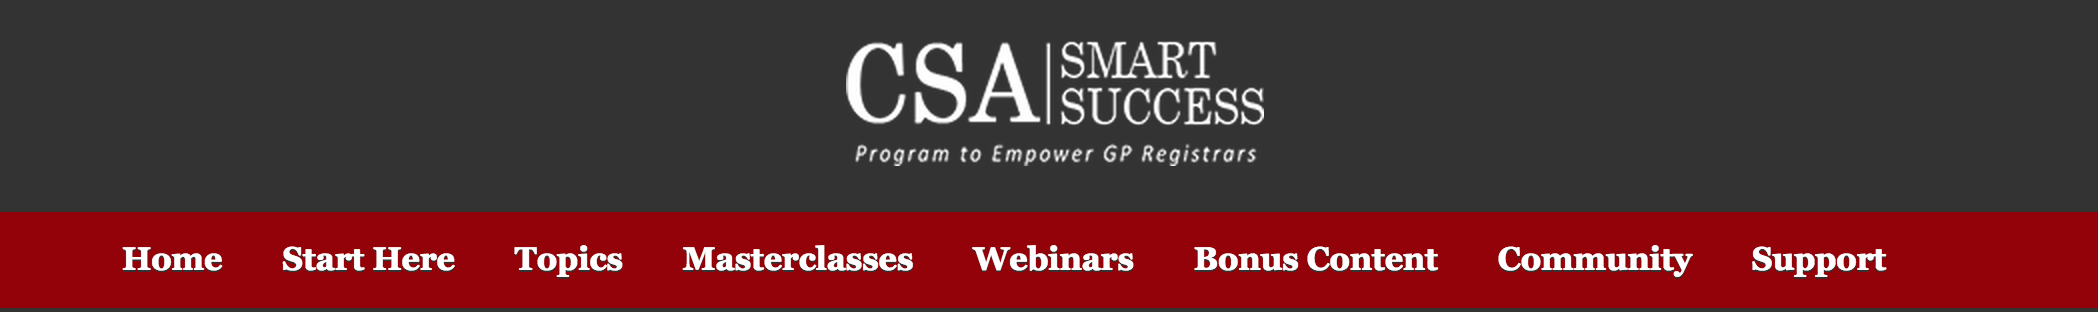 CLICK HERE TO GET FREE ACCESS FOR CSA SMARTSUCCESS ONLINE MEMBERSHIP!